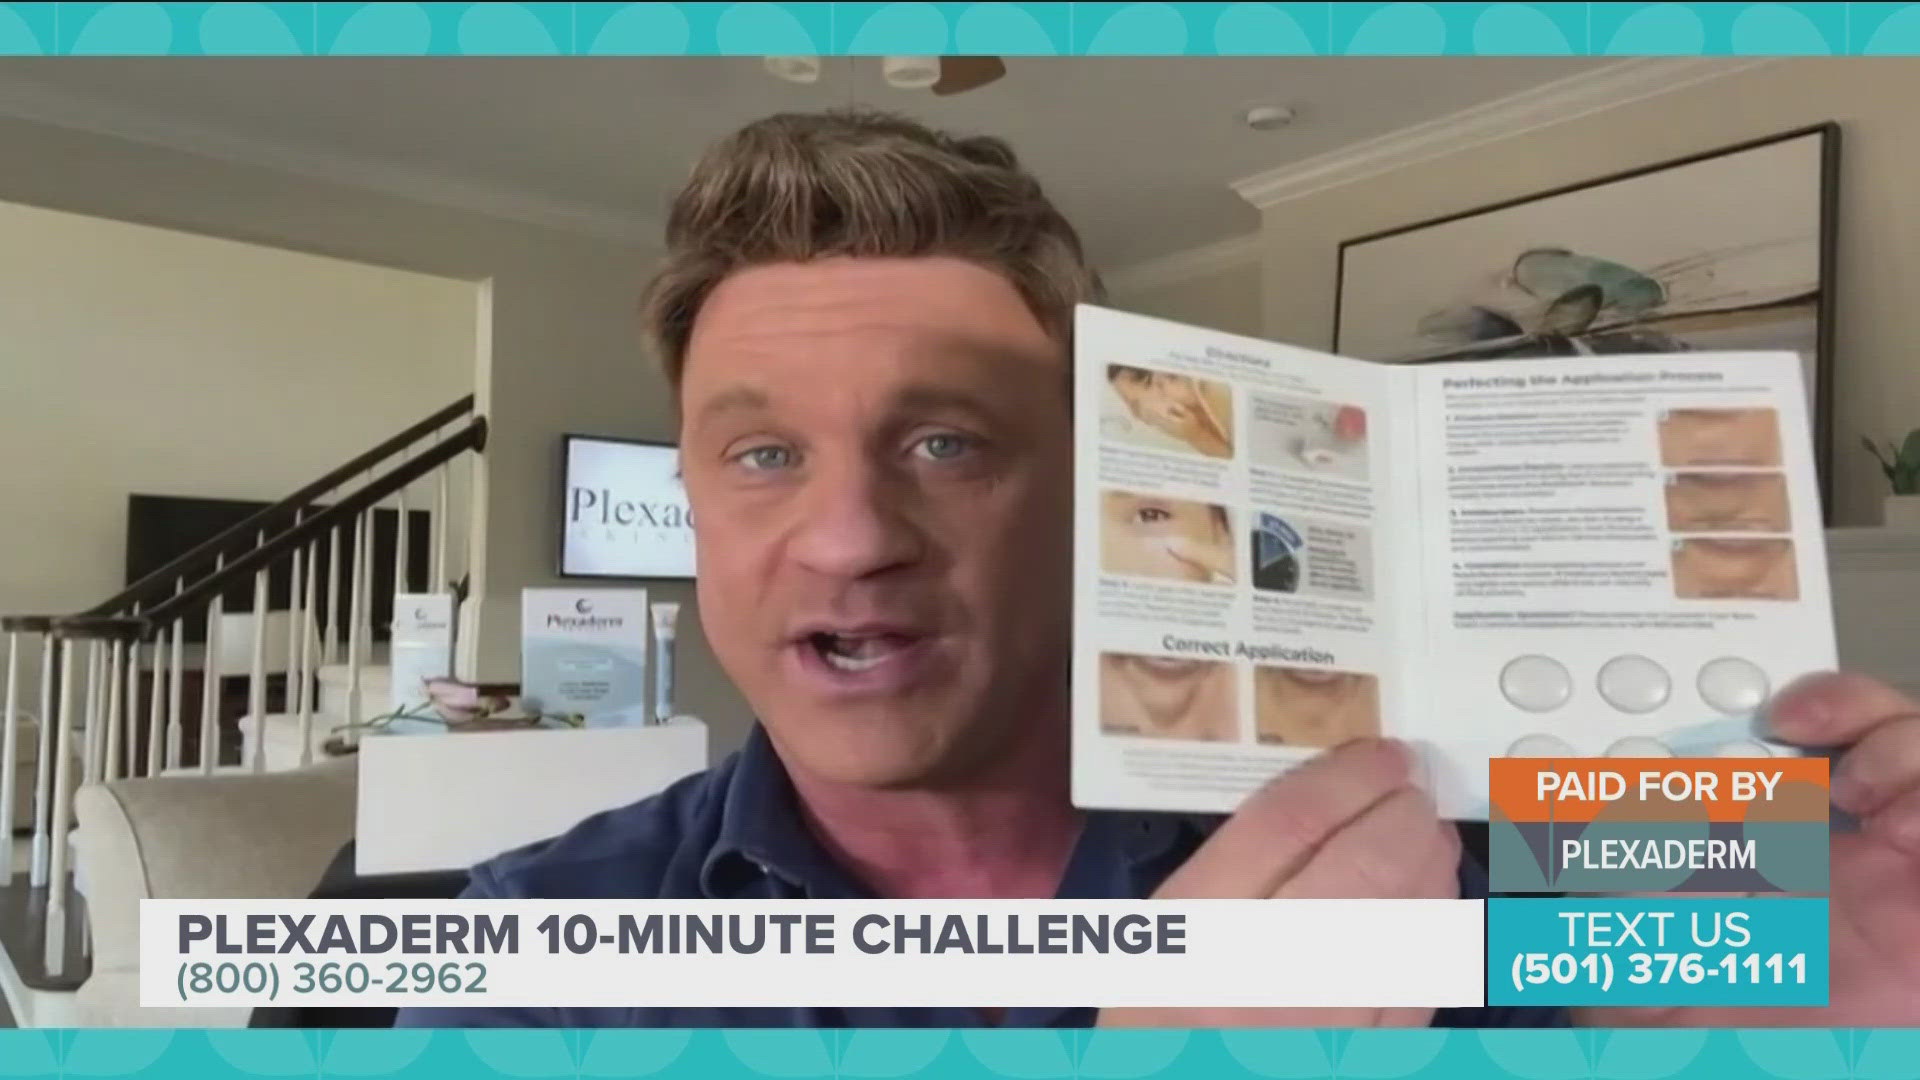 Enhance your look and reduce signs of aging by taking the 10-minute Plexaderm challenge.